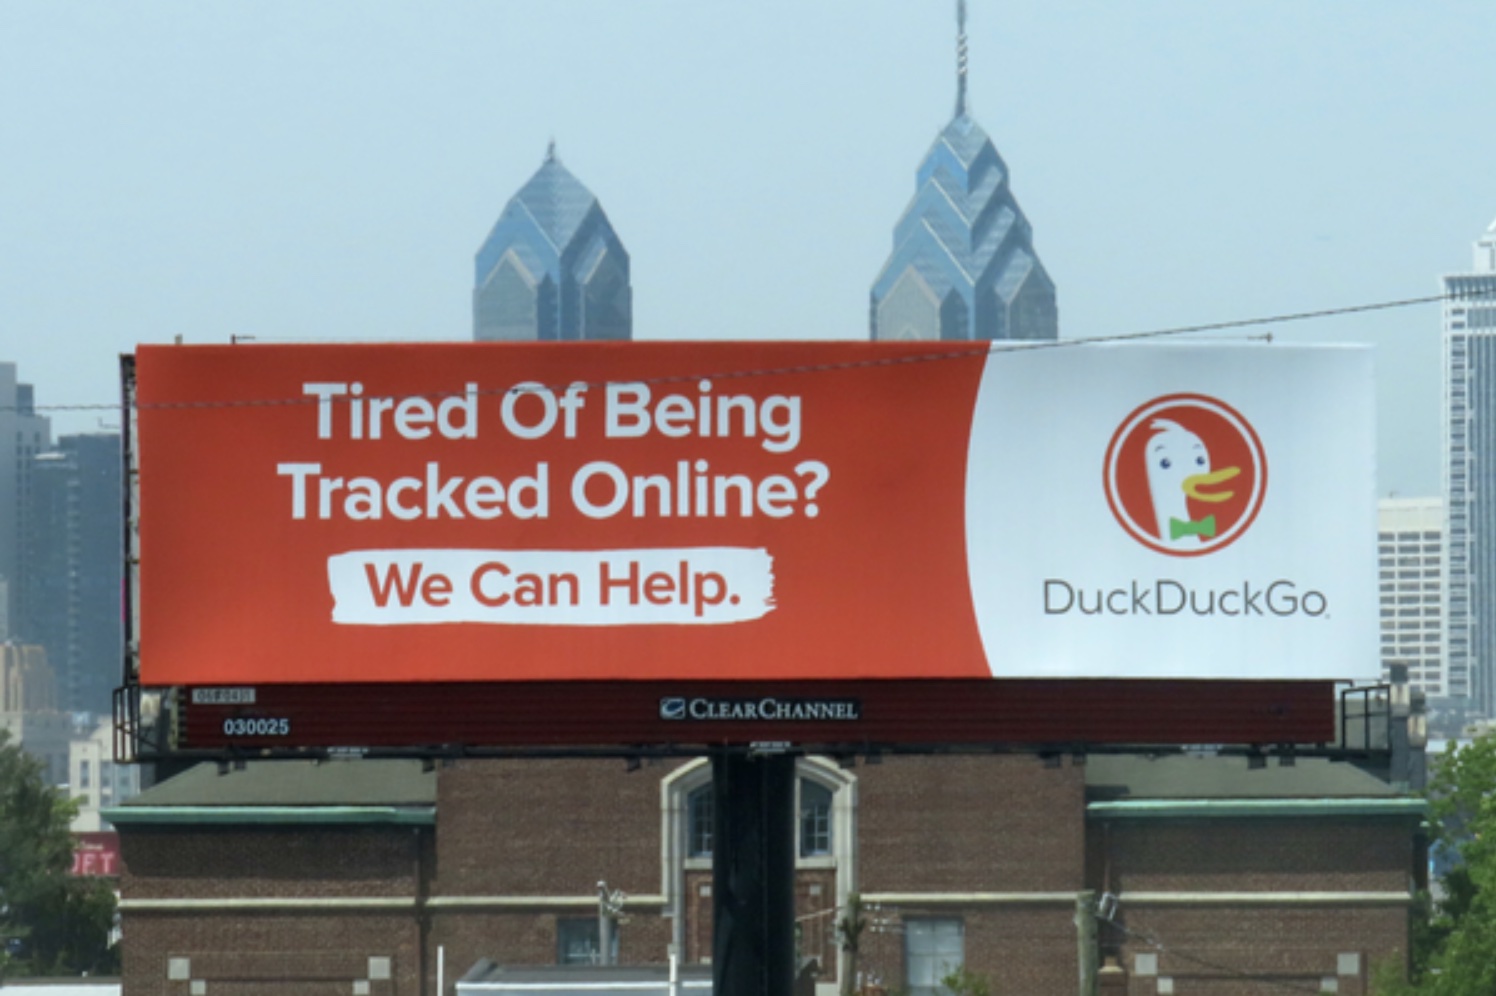 DuckDuckGo’s billboard ad with “Tired Of Being Tracked Online? We Can Help." copy